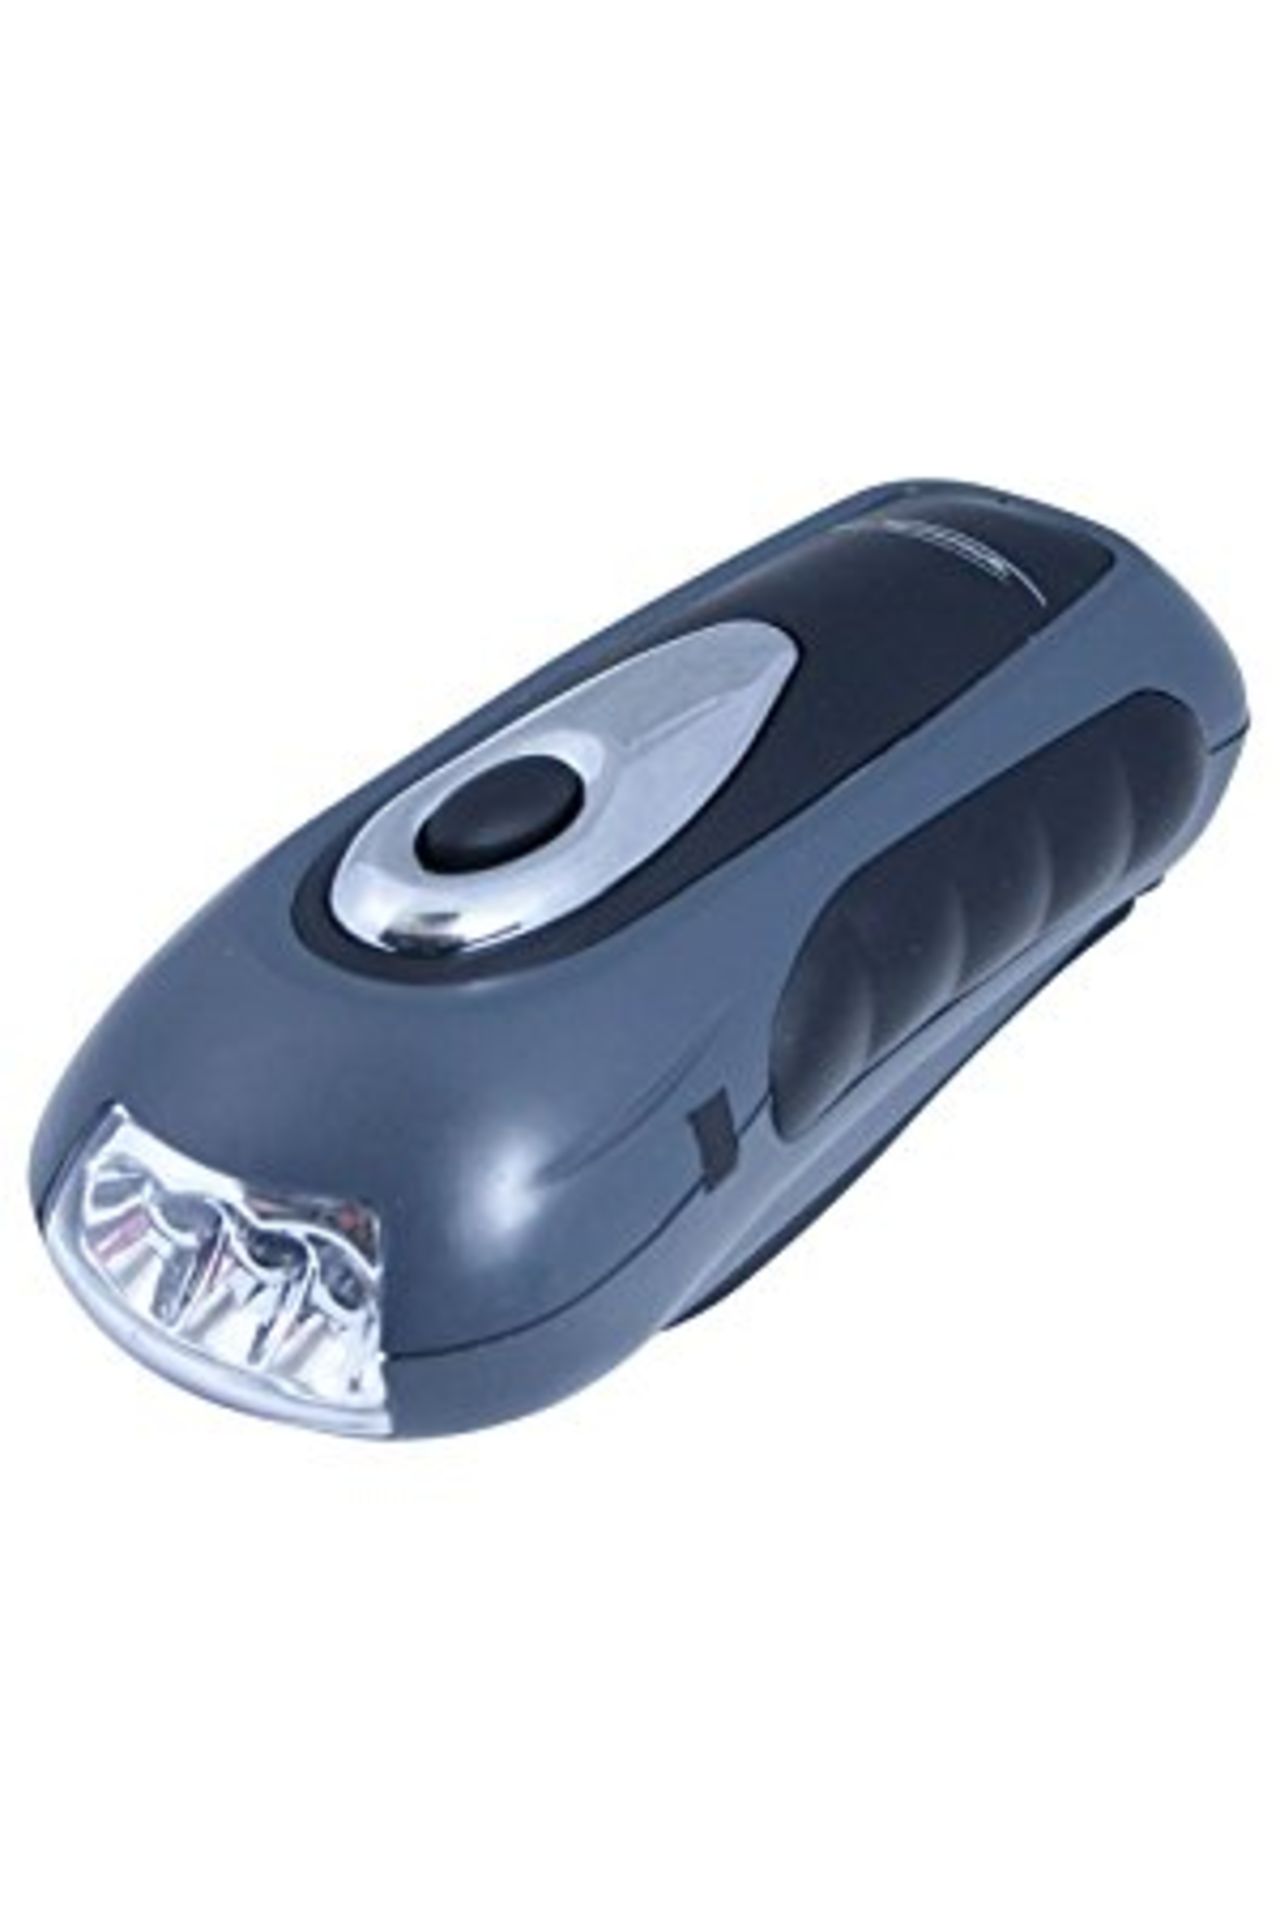 + VAT Brand New Three Super Bright LED Dynamo Torch - 1 minute of winding for 30 minutes of power